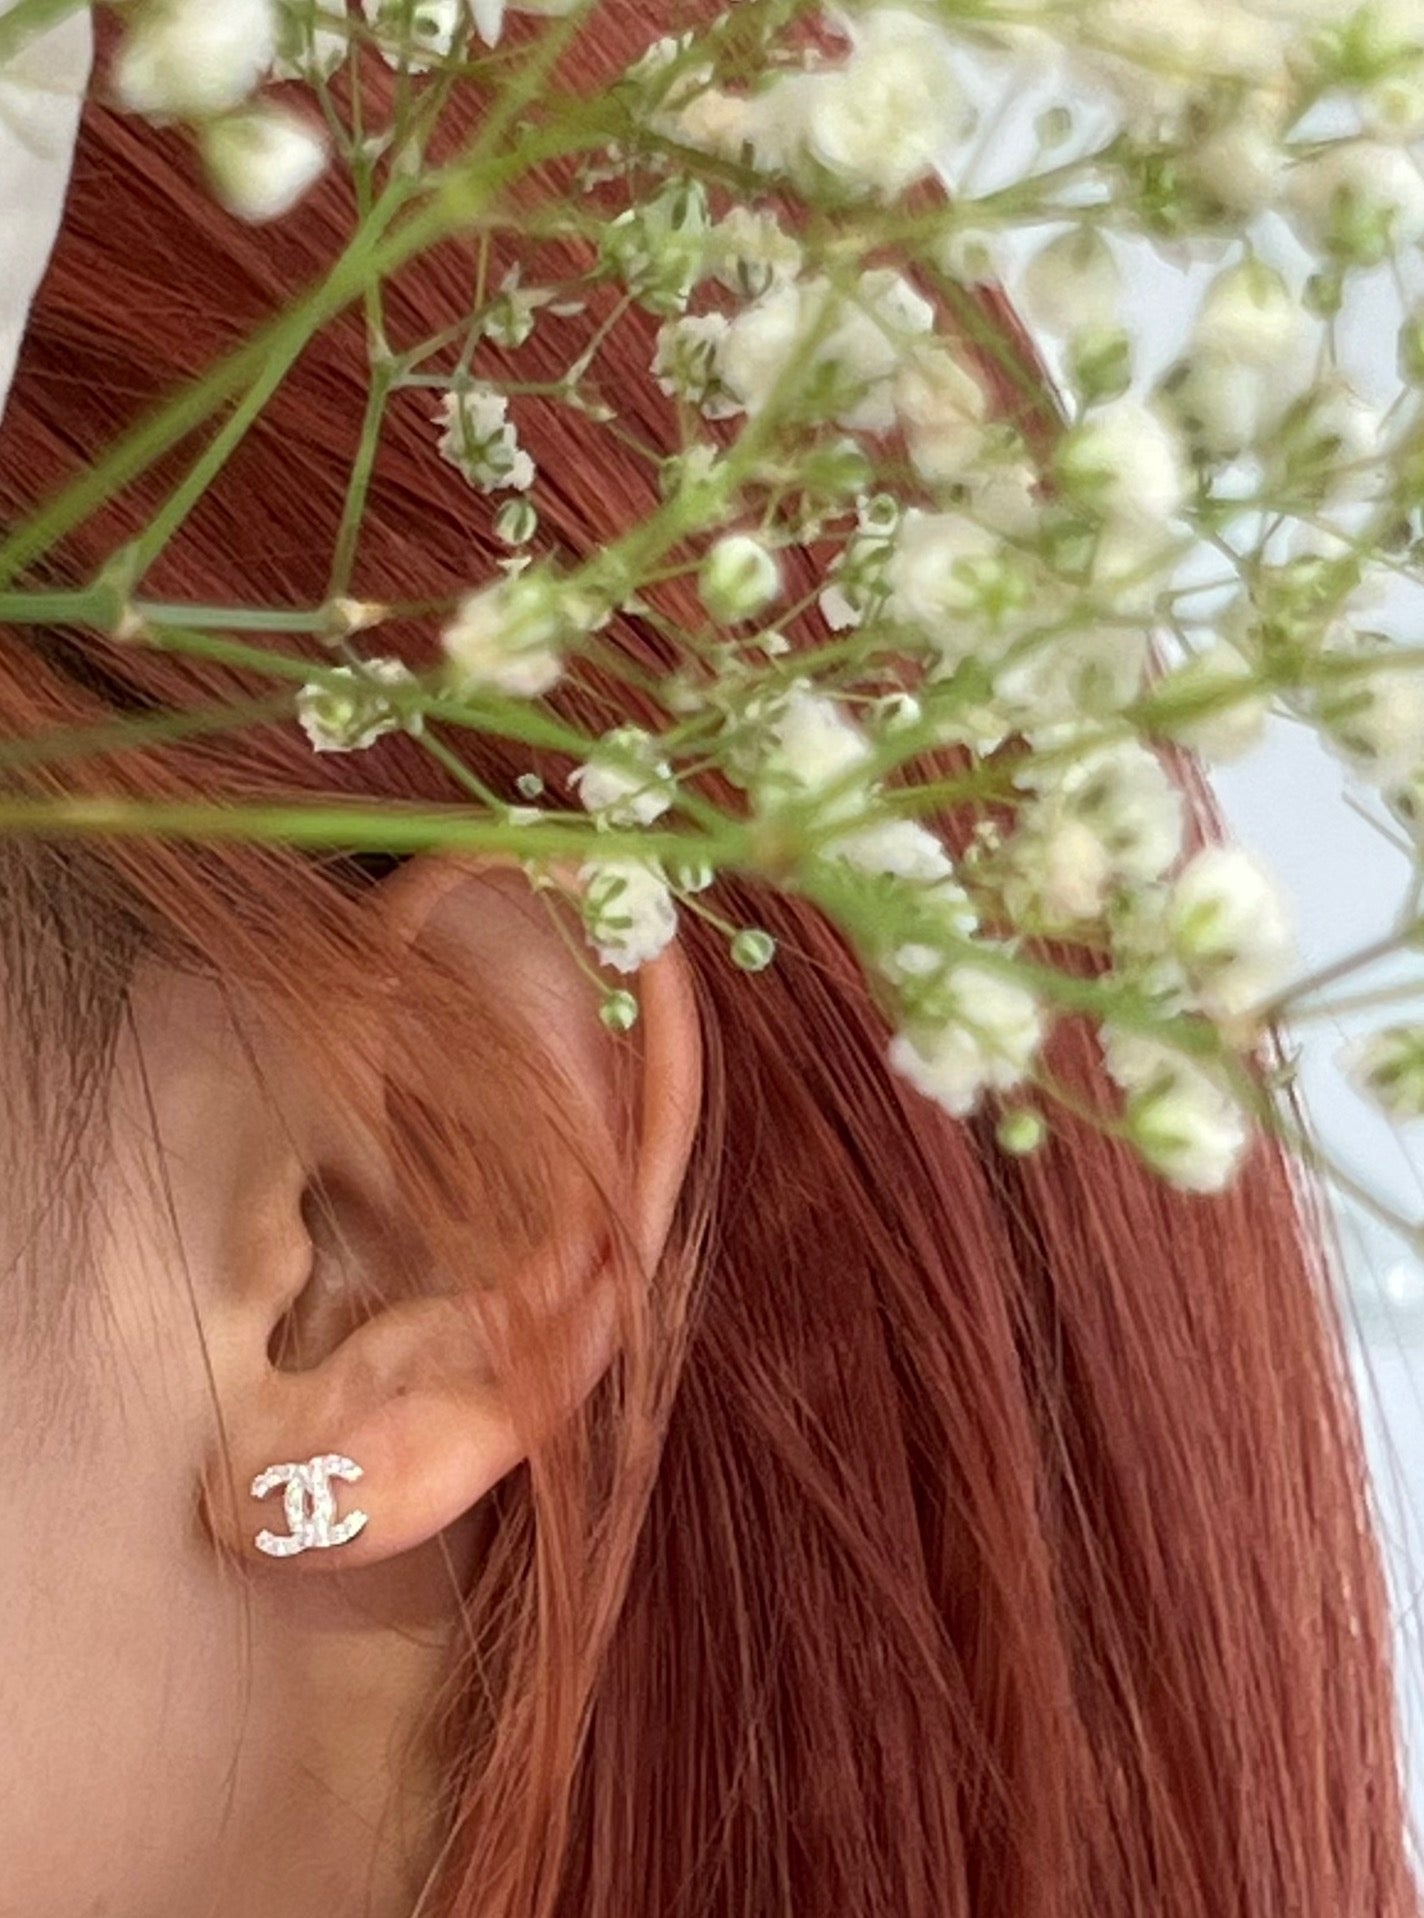 Coco's Shimmer Icon Chanel Ear Studs